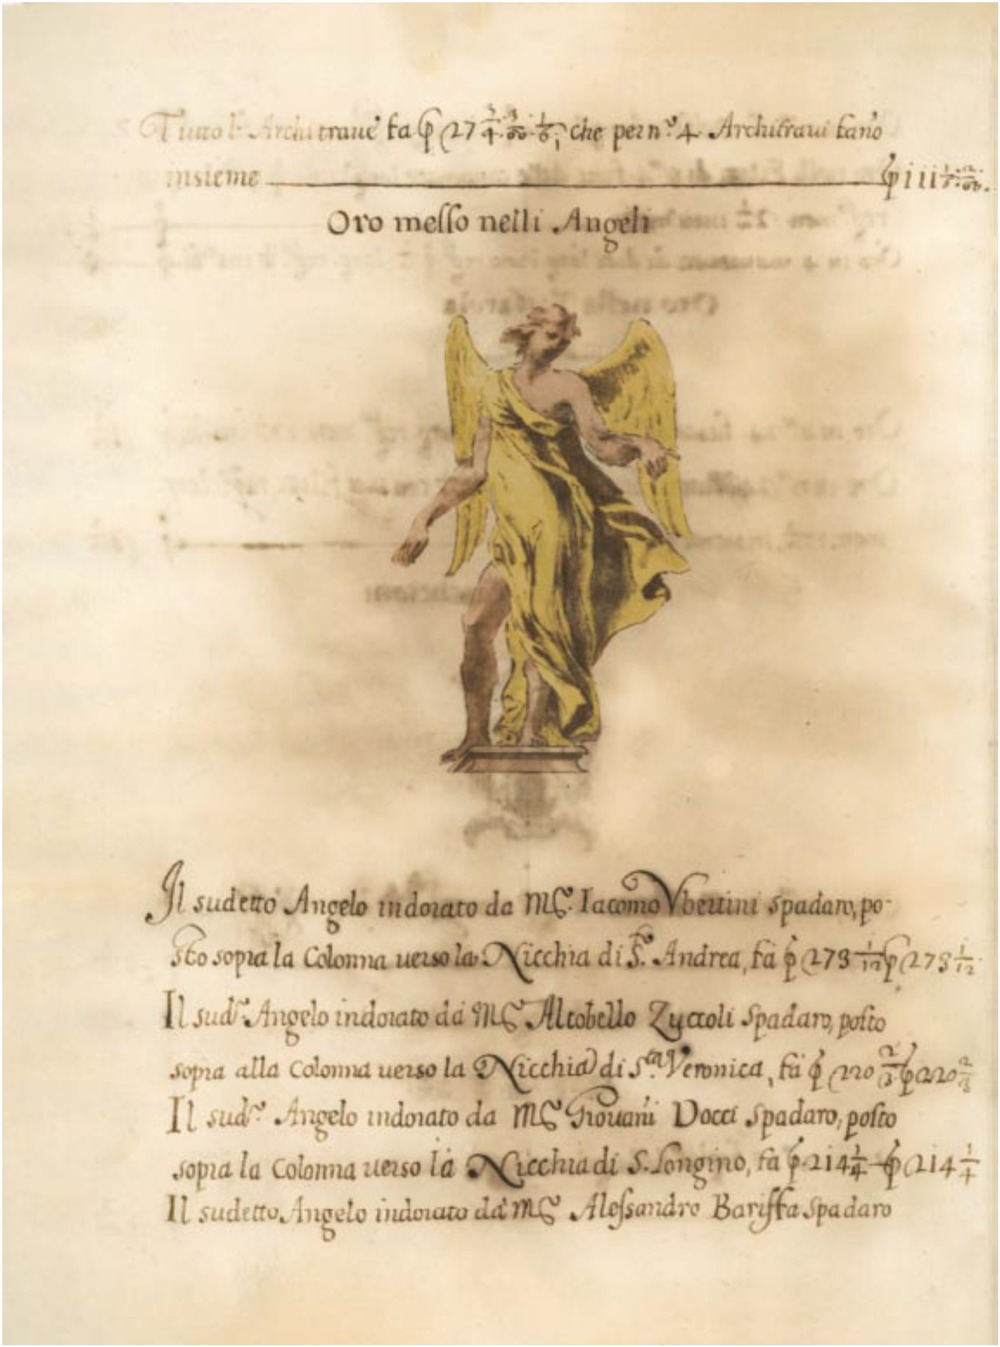 Manuscript page with text and illustration of an angel